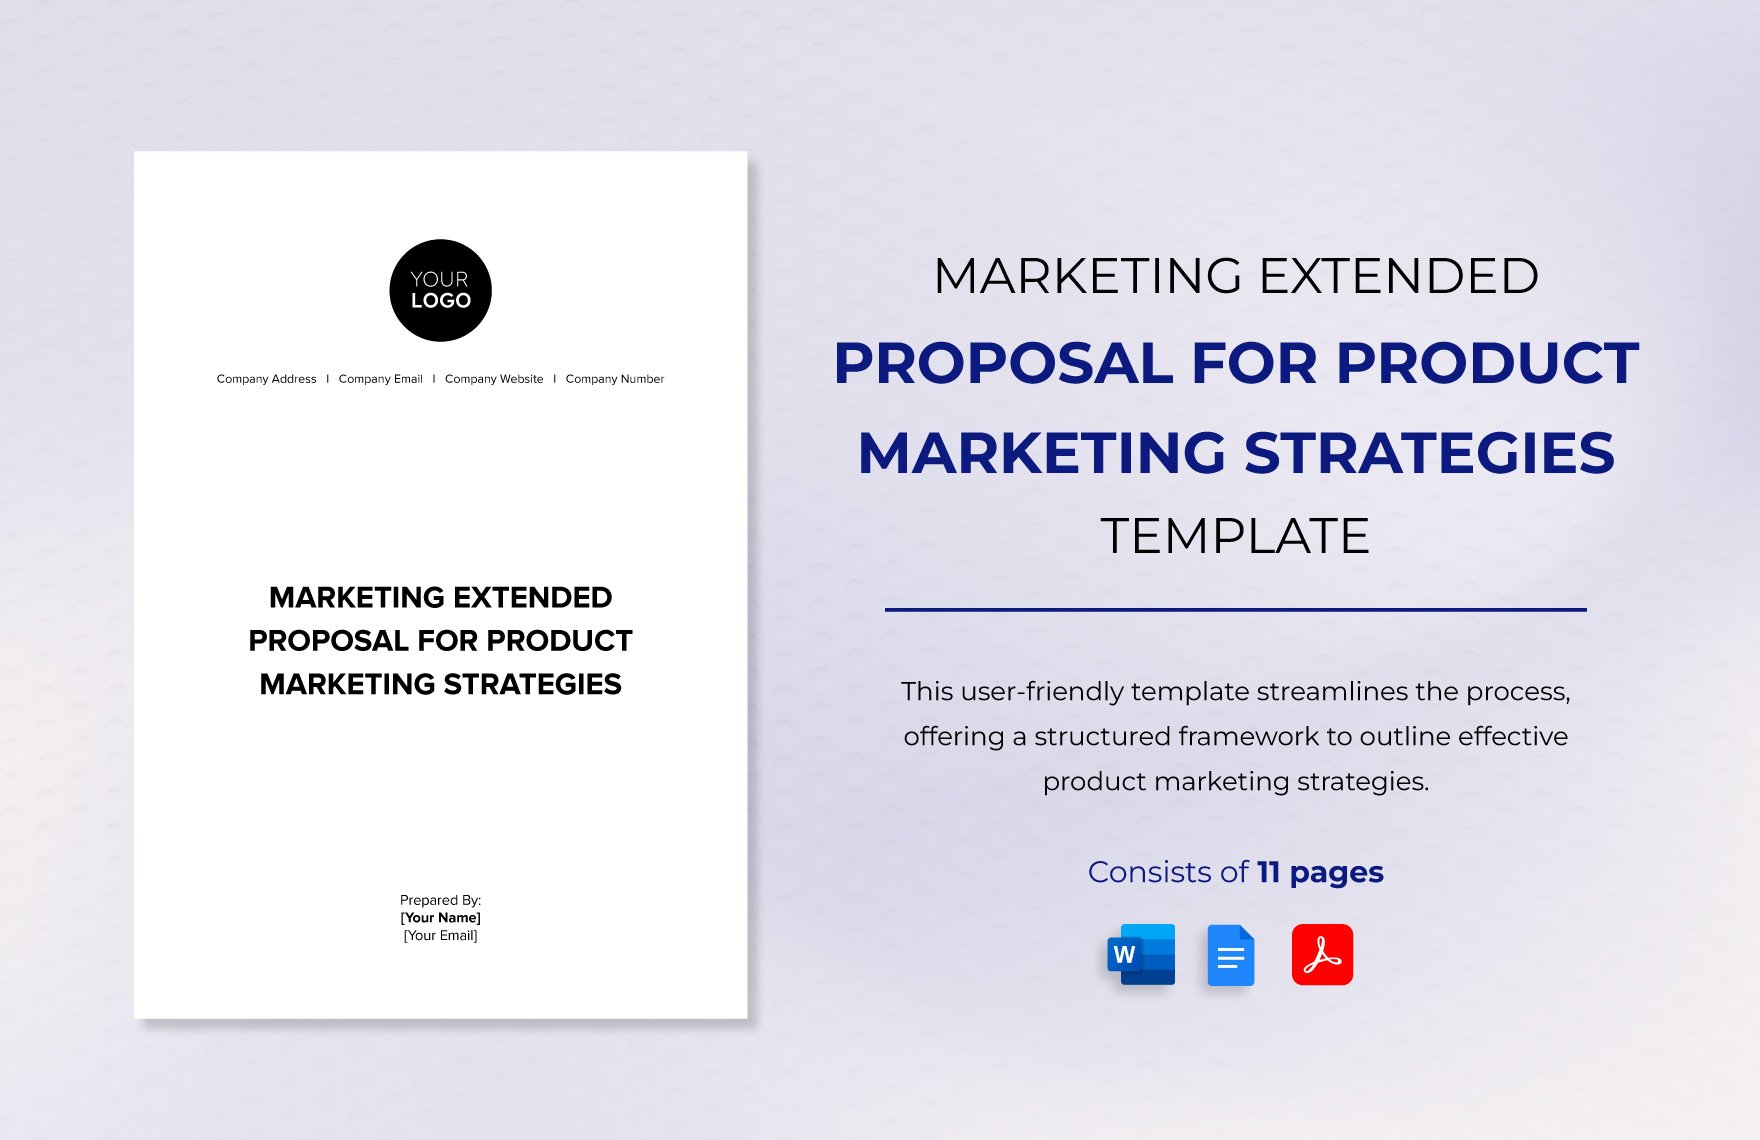 Marketing Extended Proposal for Product Marketing Strategies Template